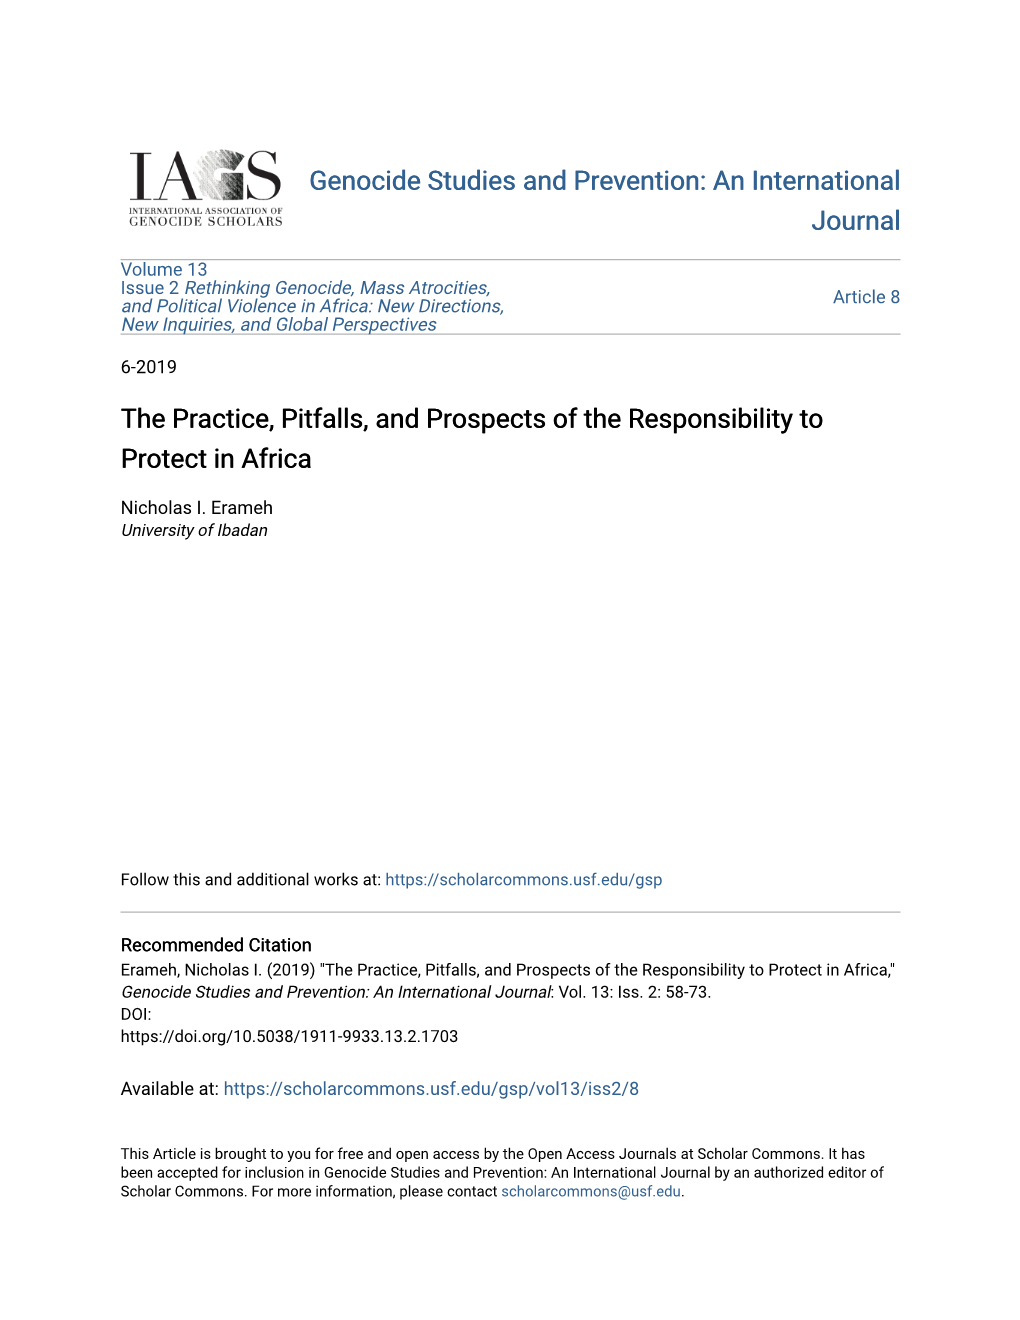 The Practice, Pitfalls, and Prospects of the Responsibility to Protect in Africa